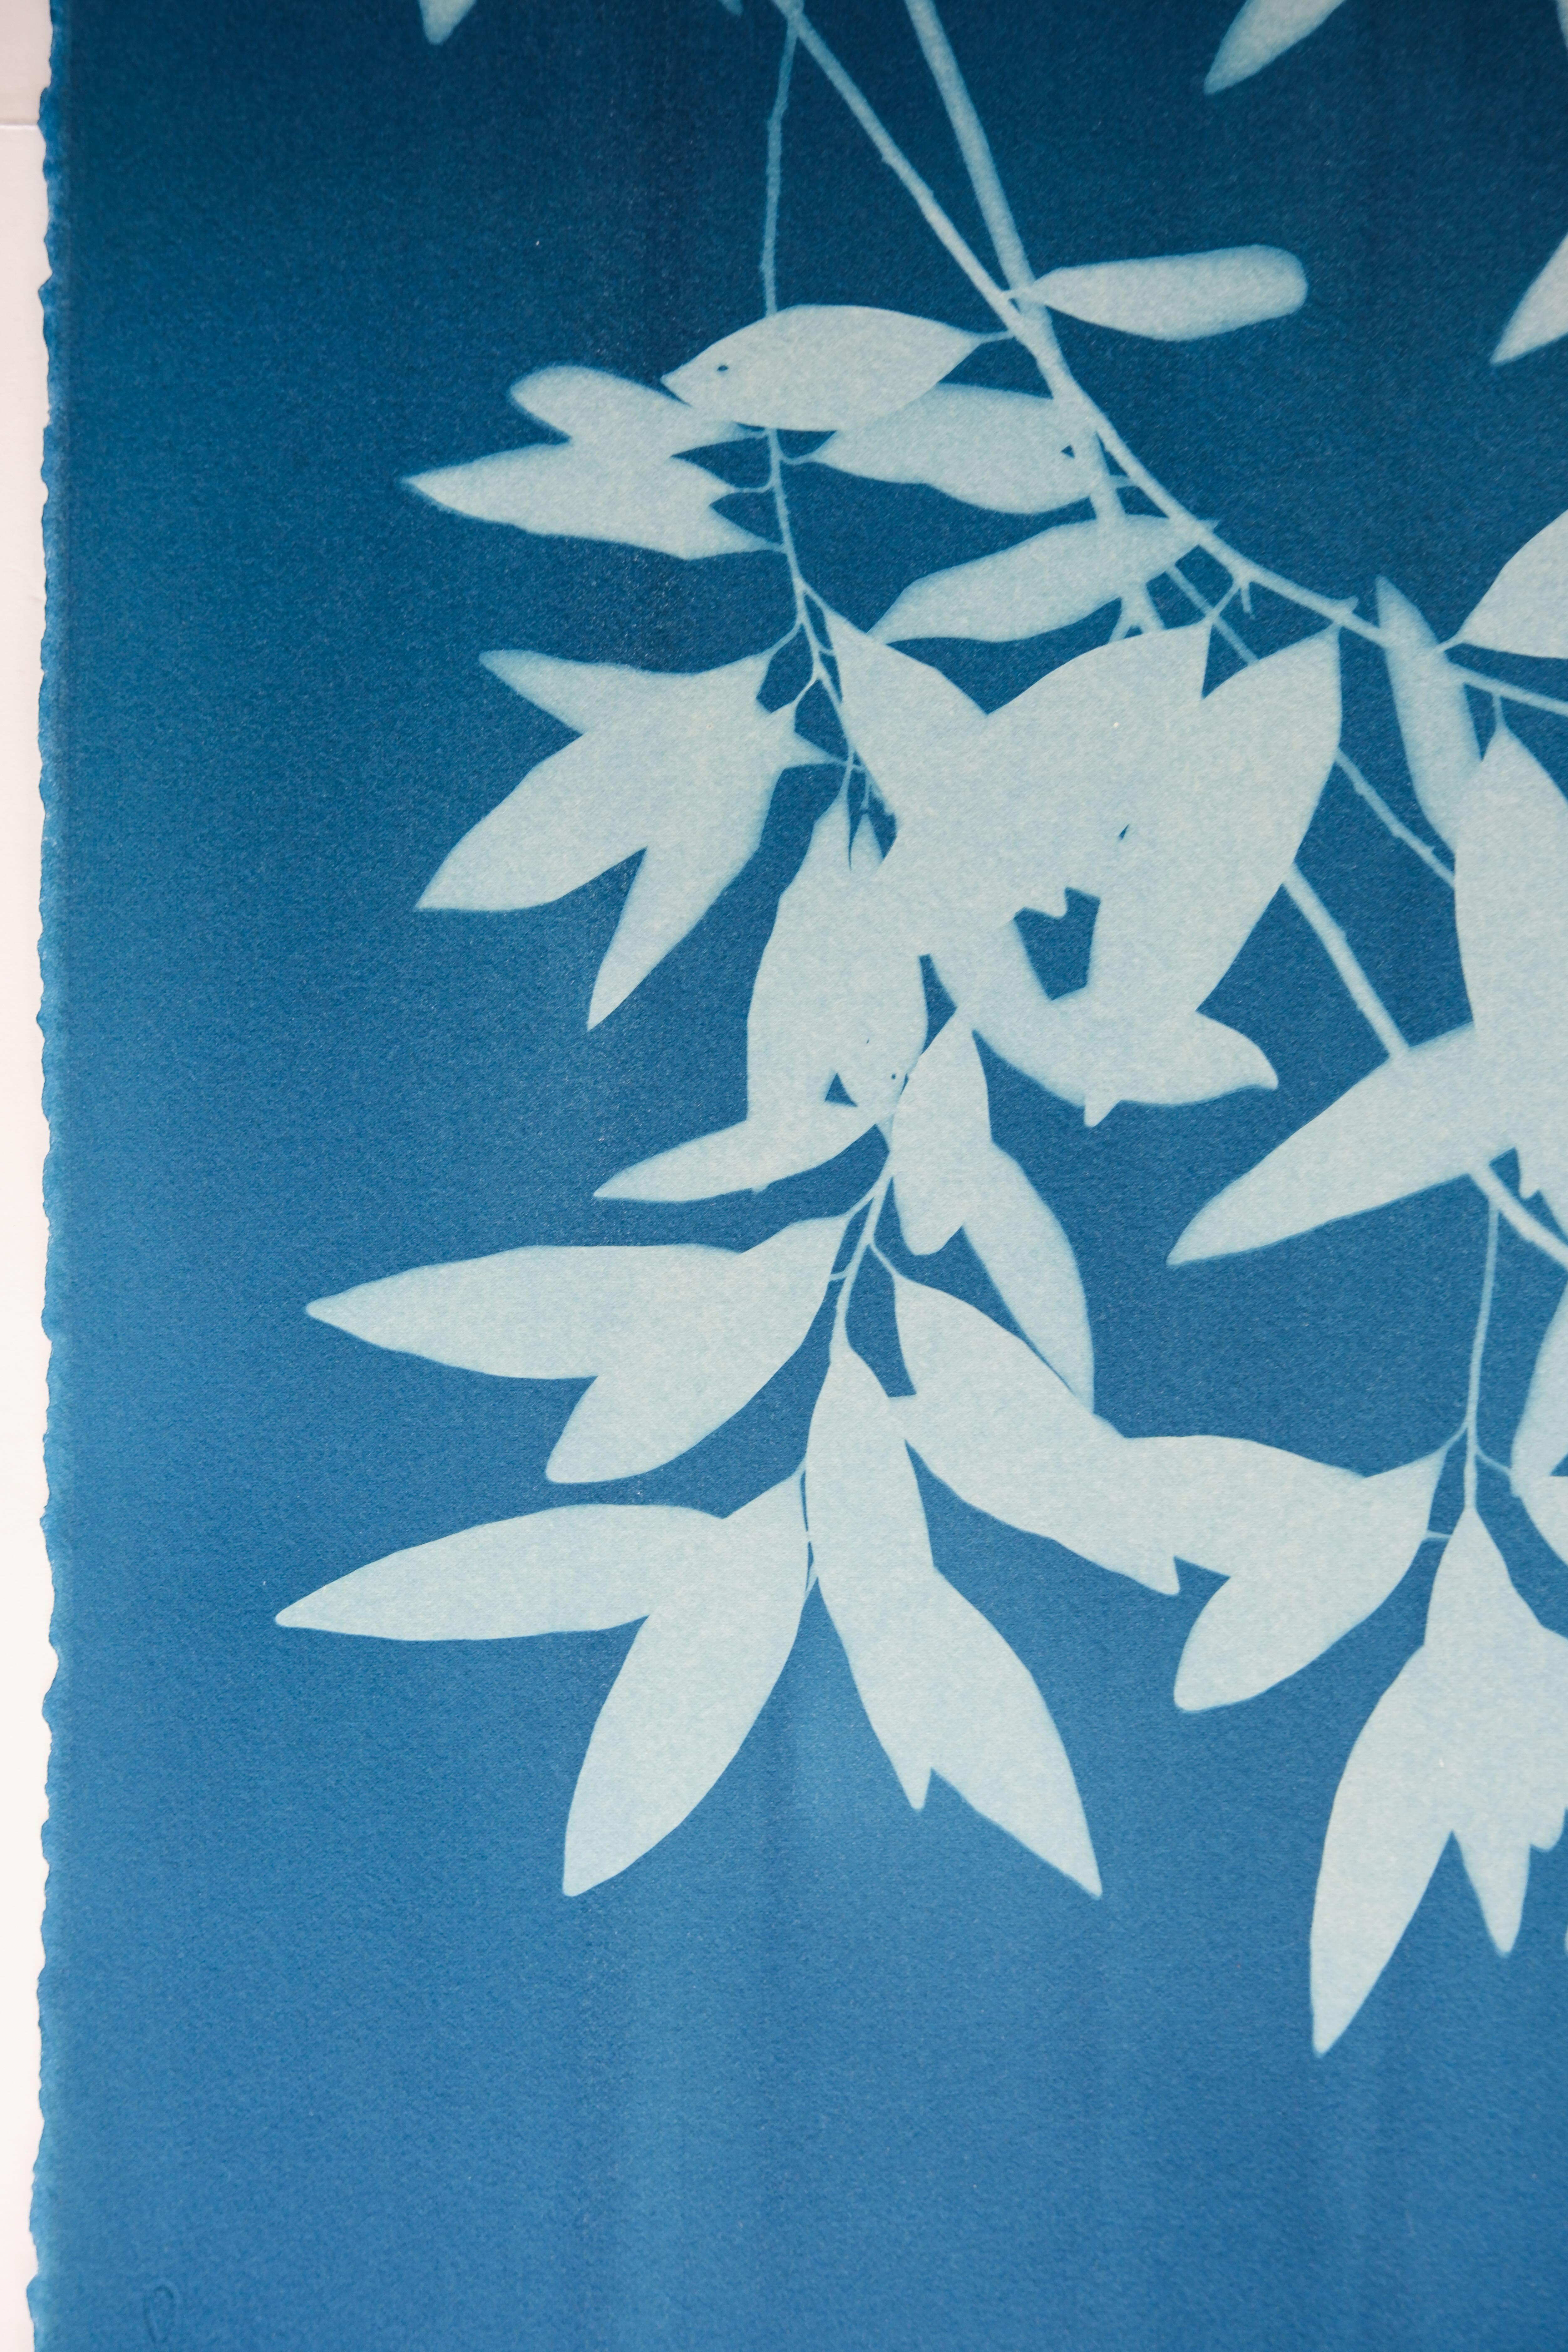 Bay Laurel Diptych (Hand-printed cyanotype, 40 x 52 inches combined) For Sale 2